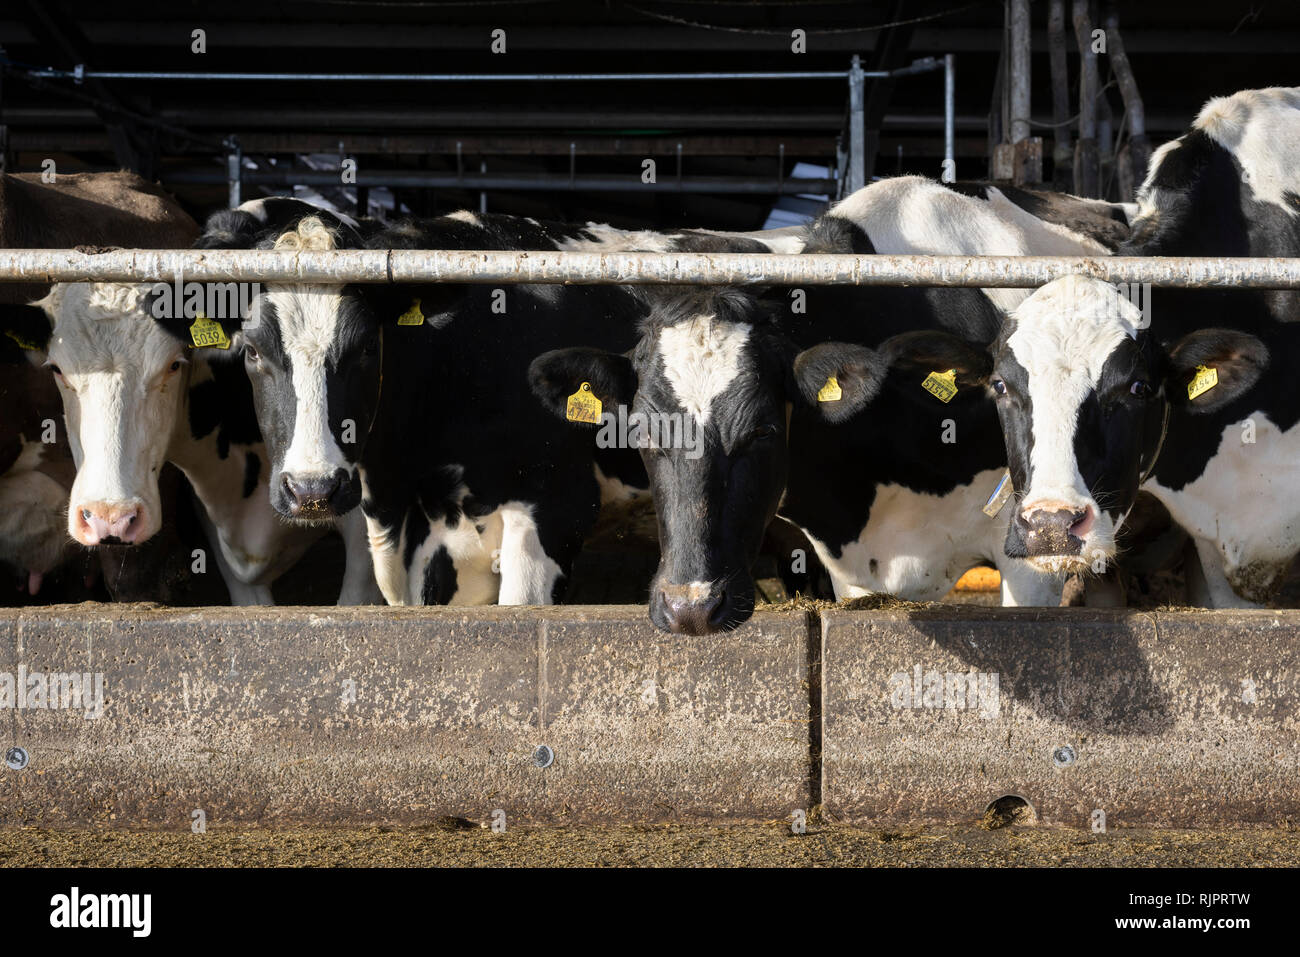 Cows in pen open to fresh air and light, Wyns, Friesland, Netherlands Stock Photo